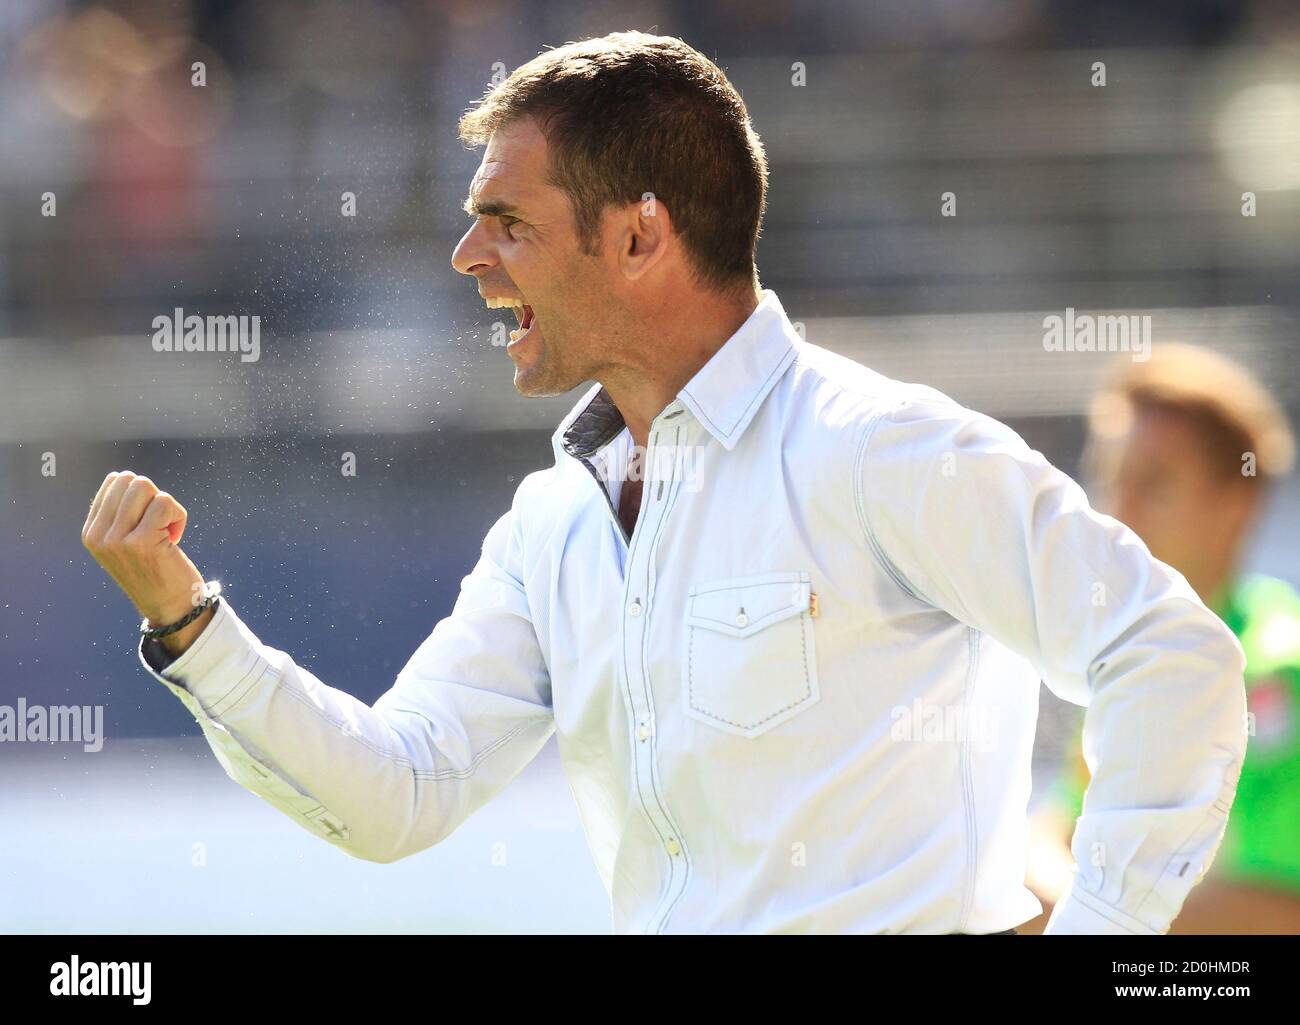 Neuchatel Xamax's coach Didier Olle-Nicolle gestures during their Swiss  Super League soccer match against FC St-Gallen in Neuchatel September 12,  2010. REUTERS/Denis Balibouse (SWITZERLAND - Tags: SPORT SOCCER Stock Photo  - Alamy